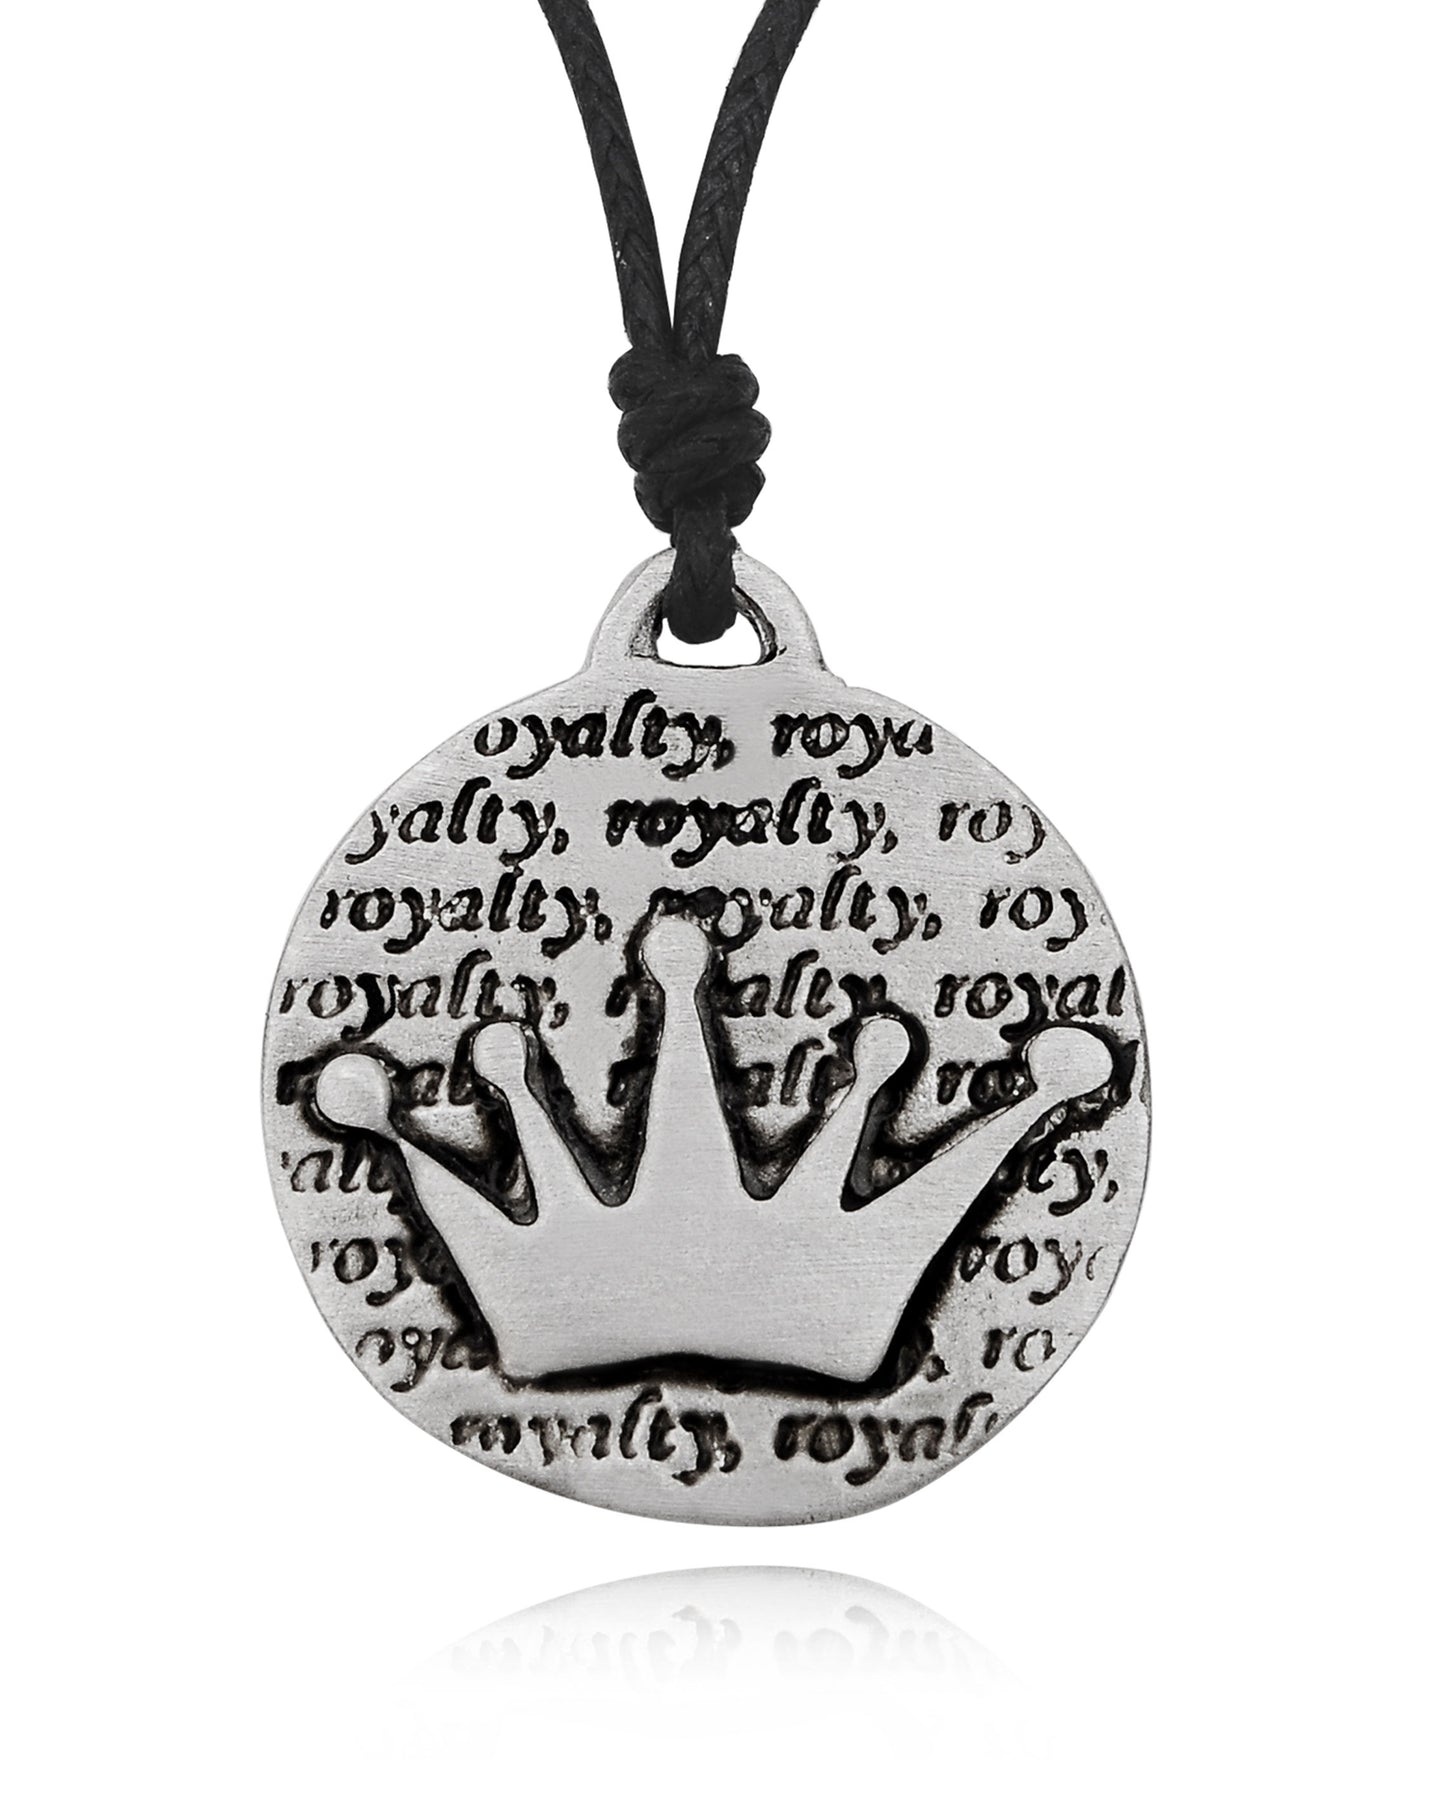 King Crown Royalty Silver Pewter Charm Necklace Pendant Jewelry